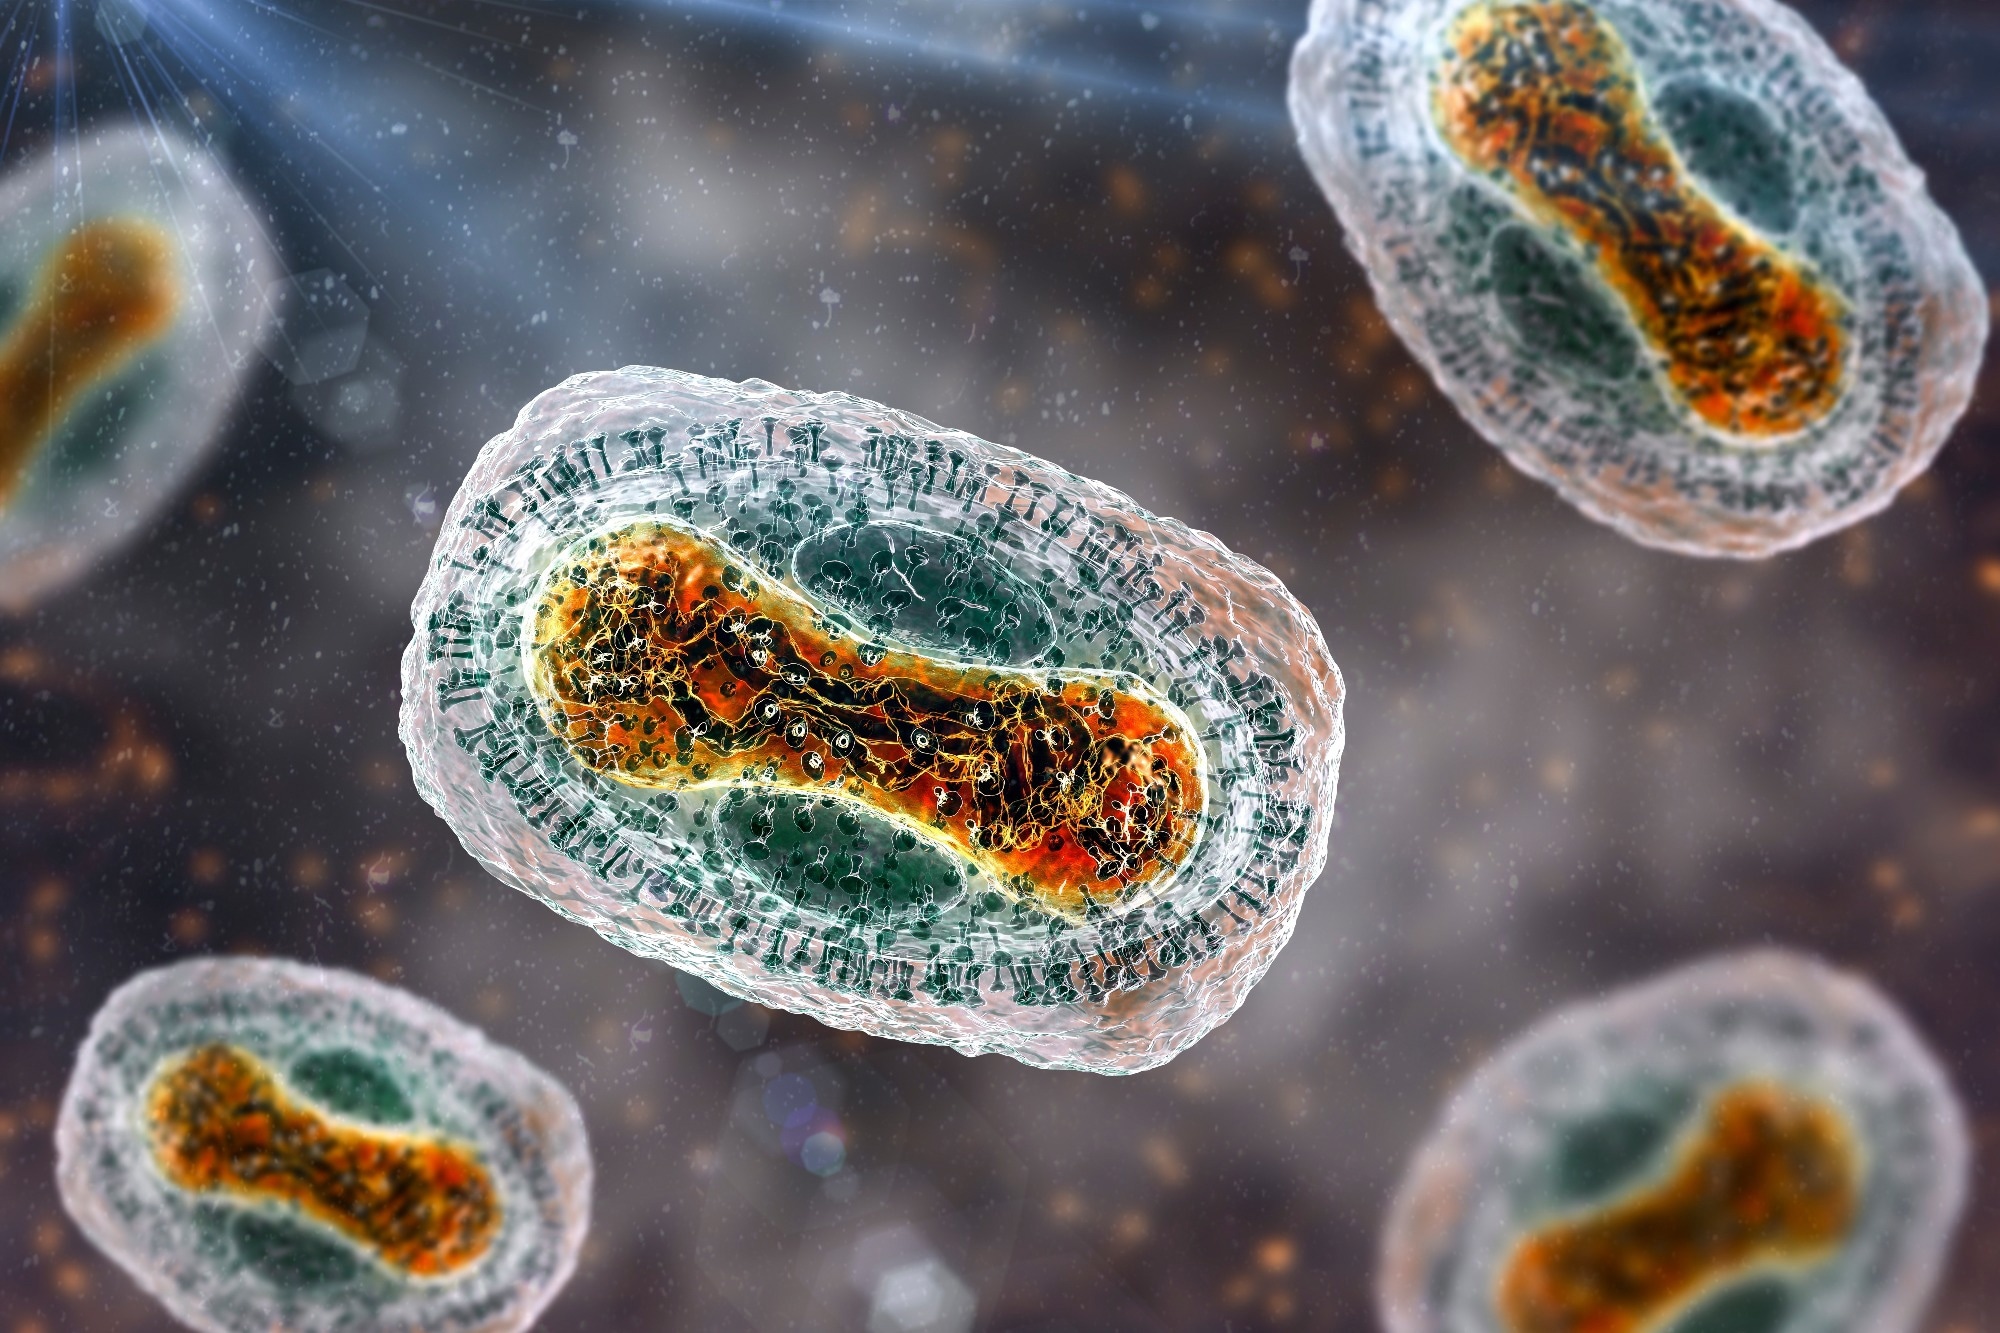 Study: Clinical characteristics of monkeypox virus infections among men with and without HIV: A large outbreak cohort in Germany. Image Credit:  Kateryna Kon / Shutterstock